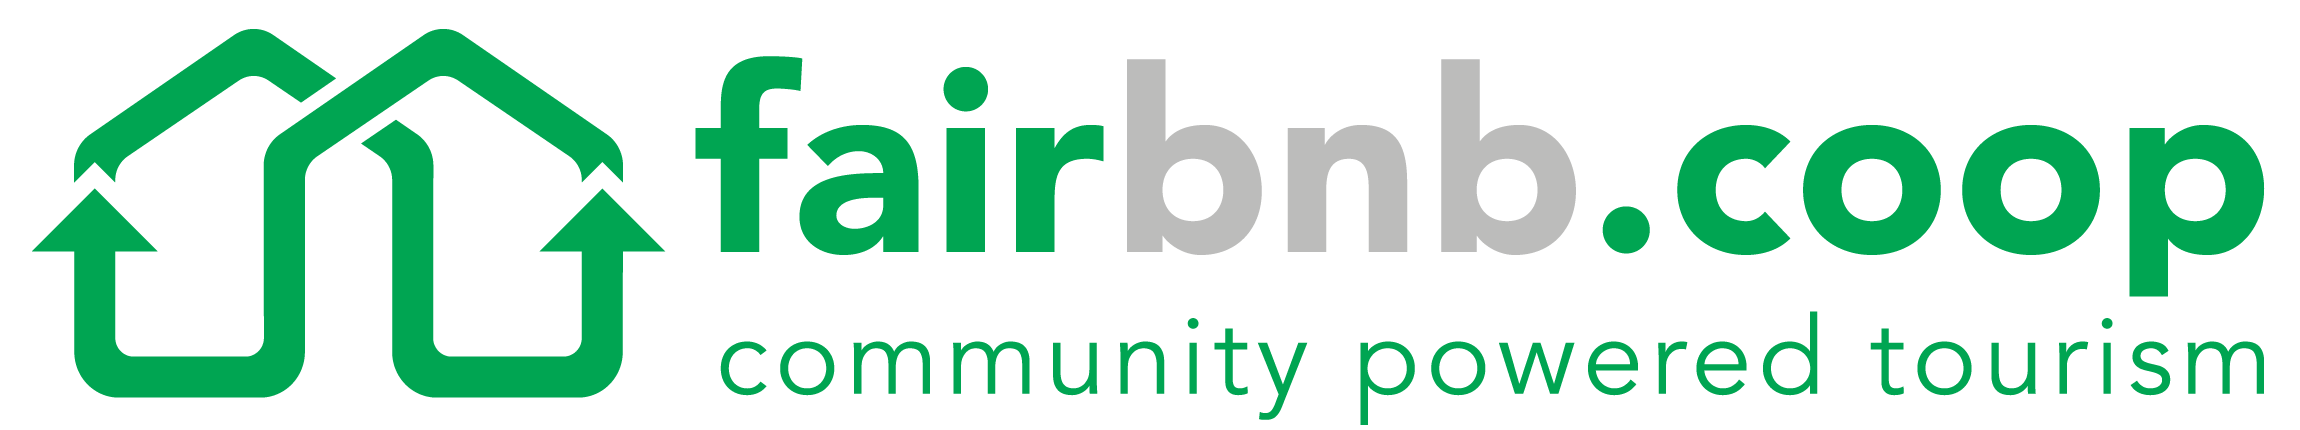 Fairbnb.coop - Community powered tourism